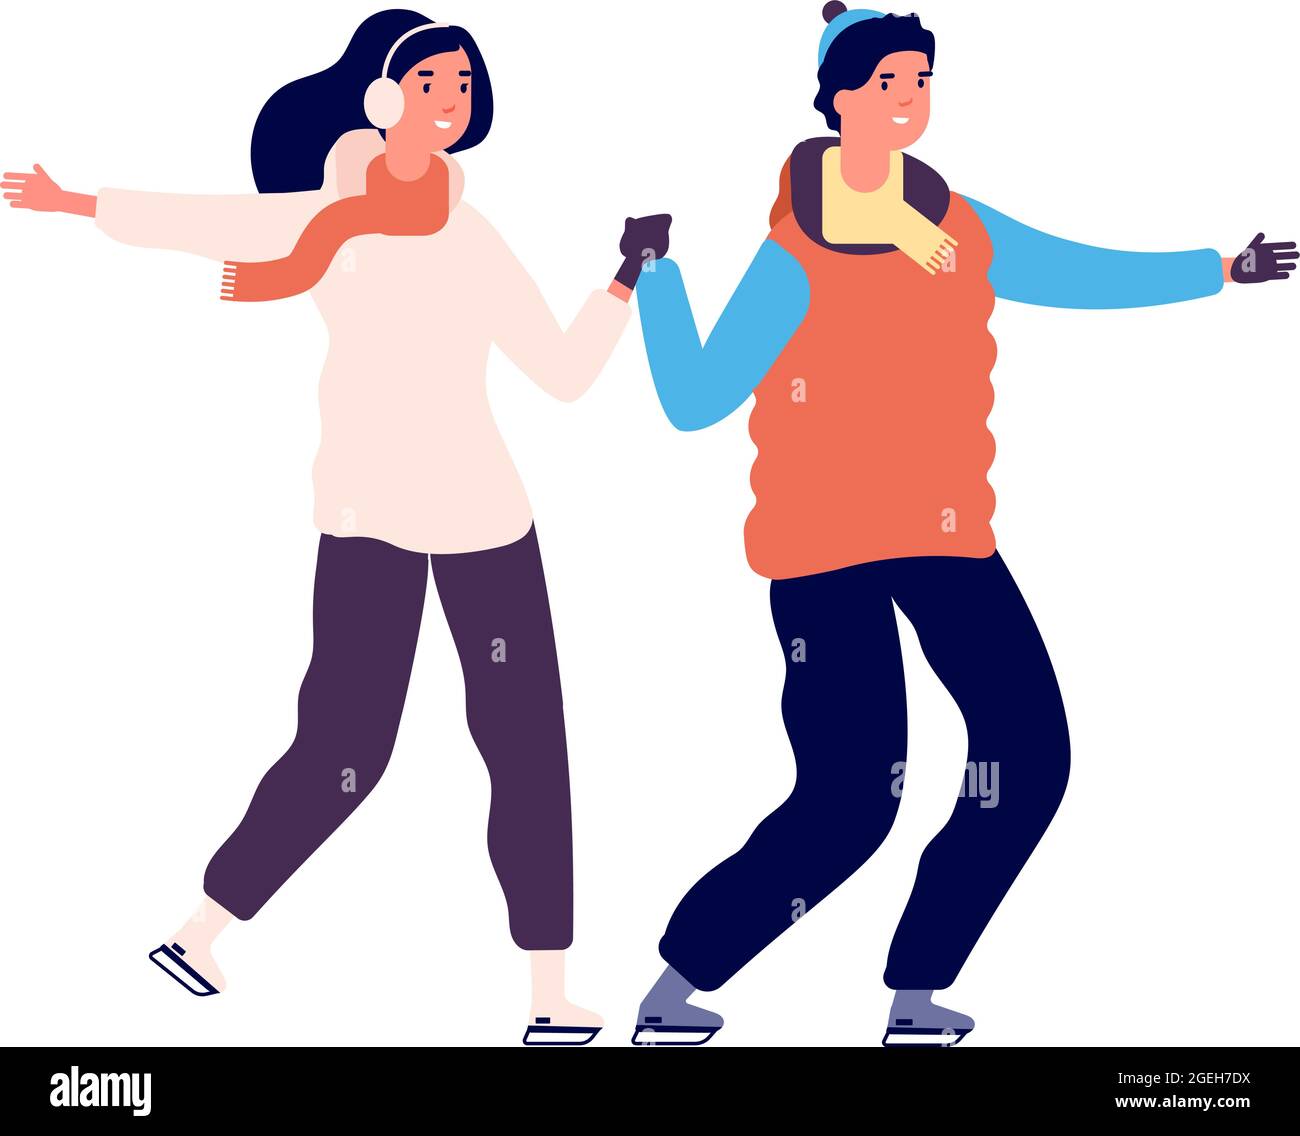 Couple skating. People on ice, winter outdoor activities. Happy sport man woman, active holiday dating vector illustration Stock Vector